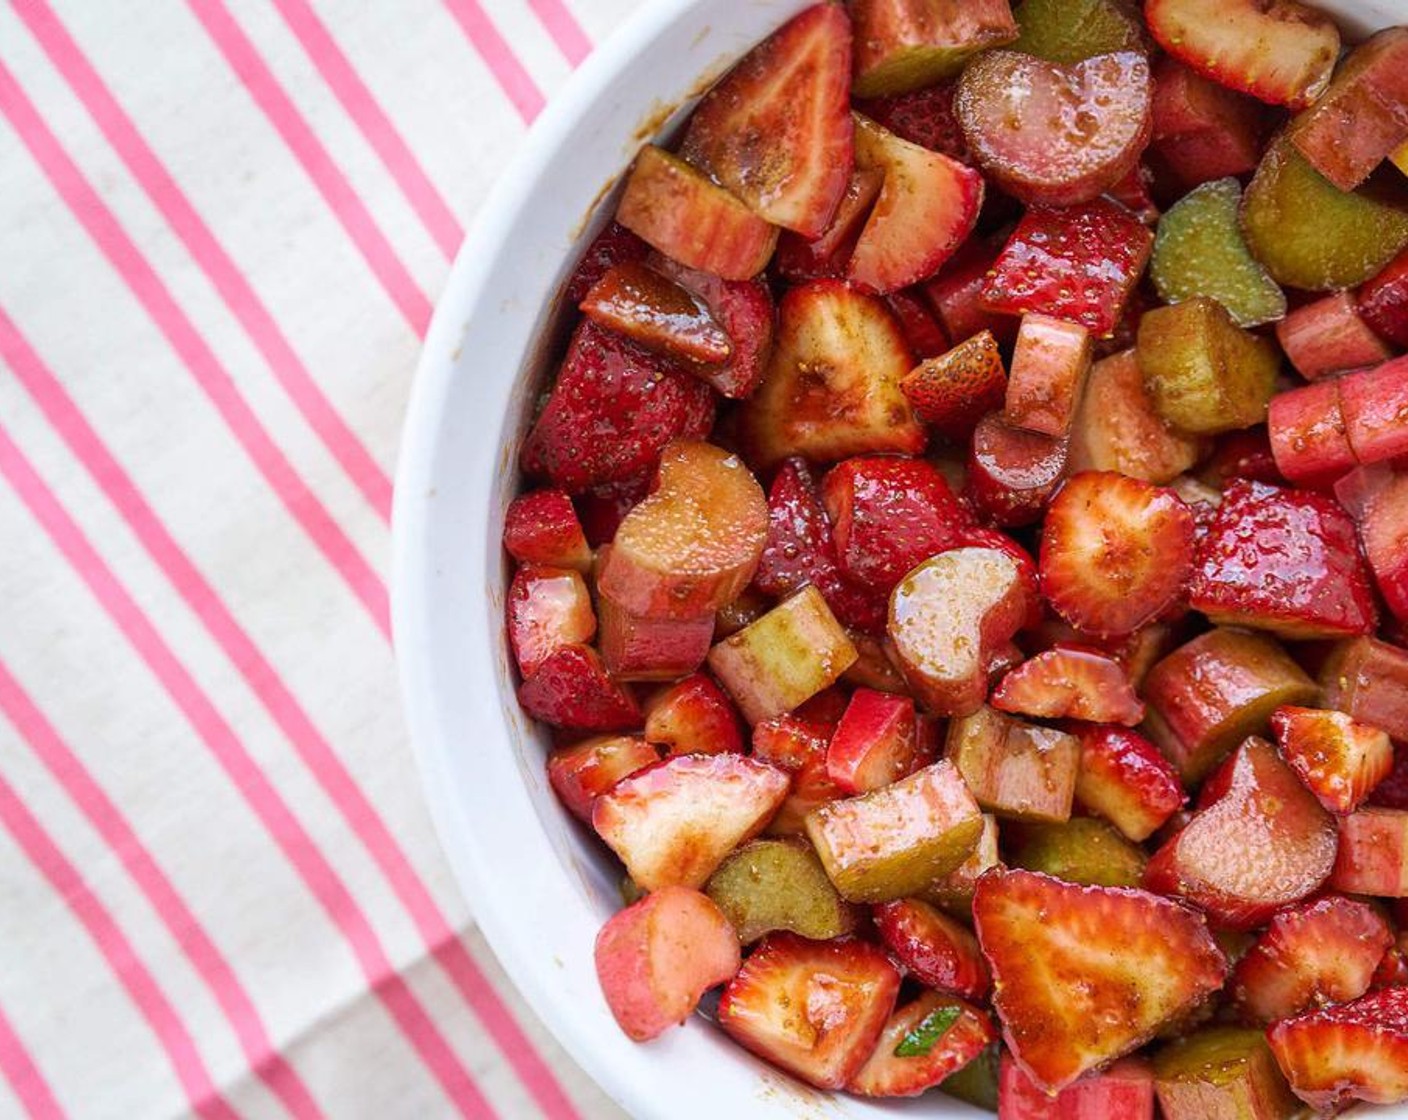 step 2 In a large bowl, combine Fresh Strawberries (2 cups), Rhubarb (2 cups), Coconut Sugar (1/4 cup), and Ground Cinnamon (1 tsp).